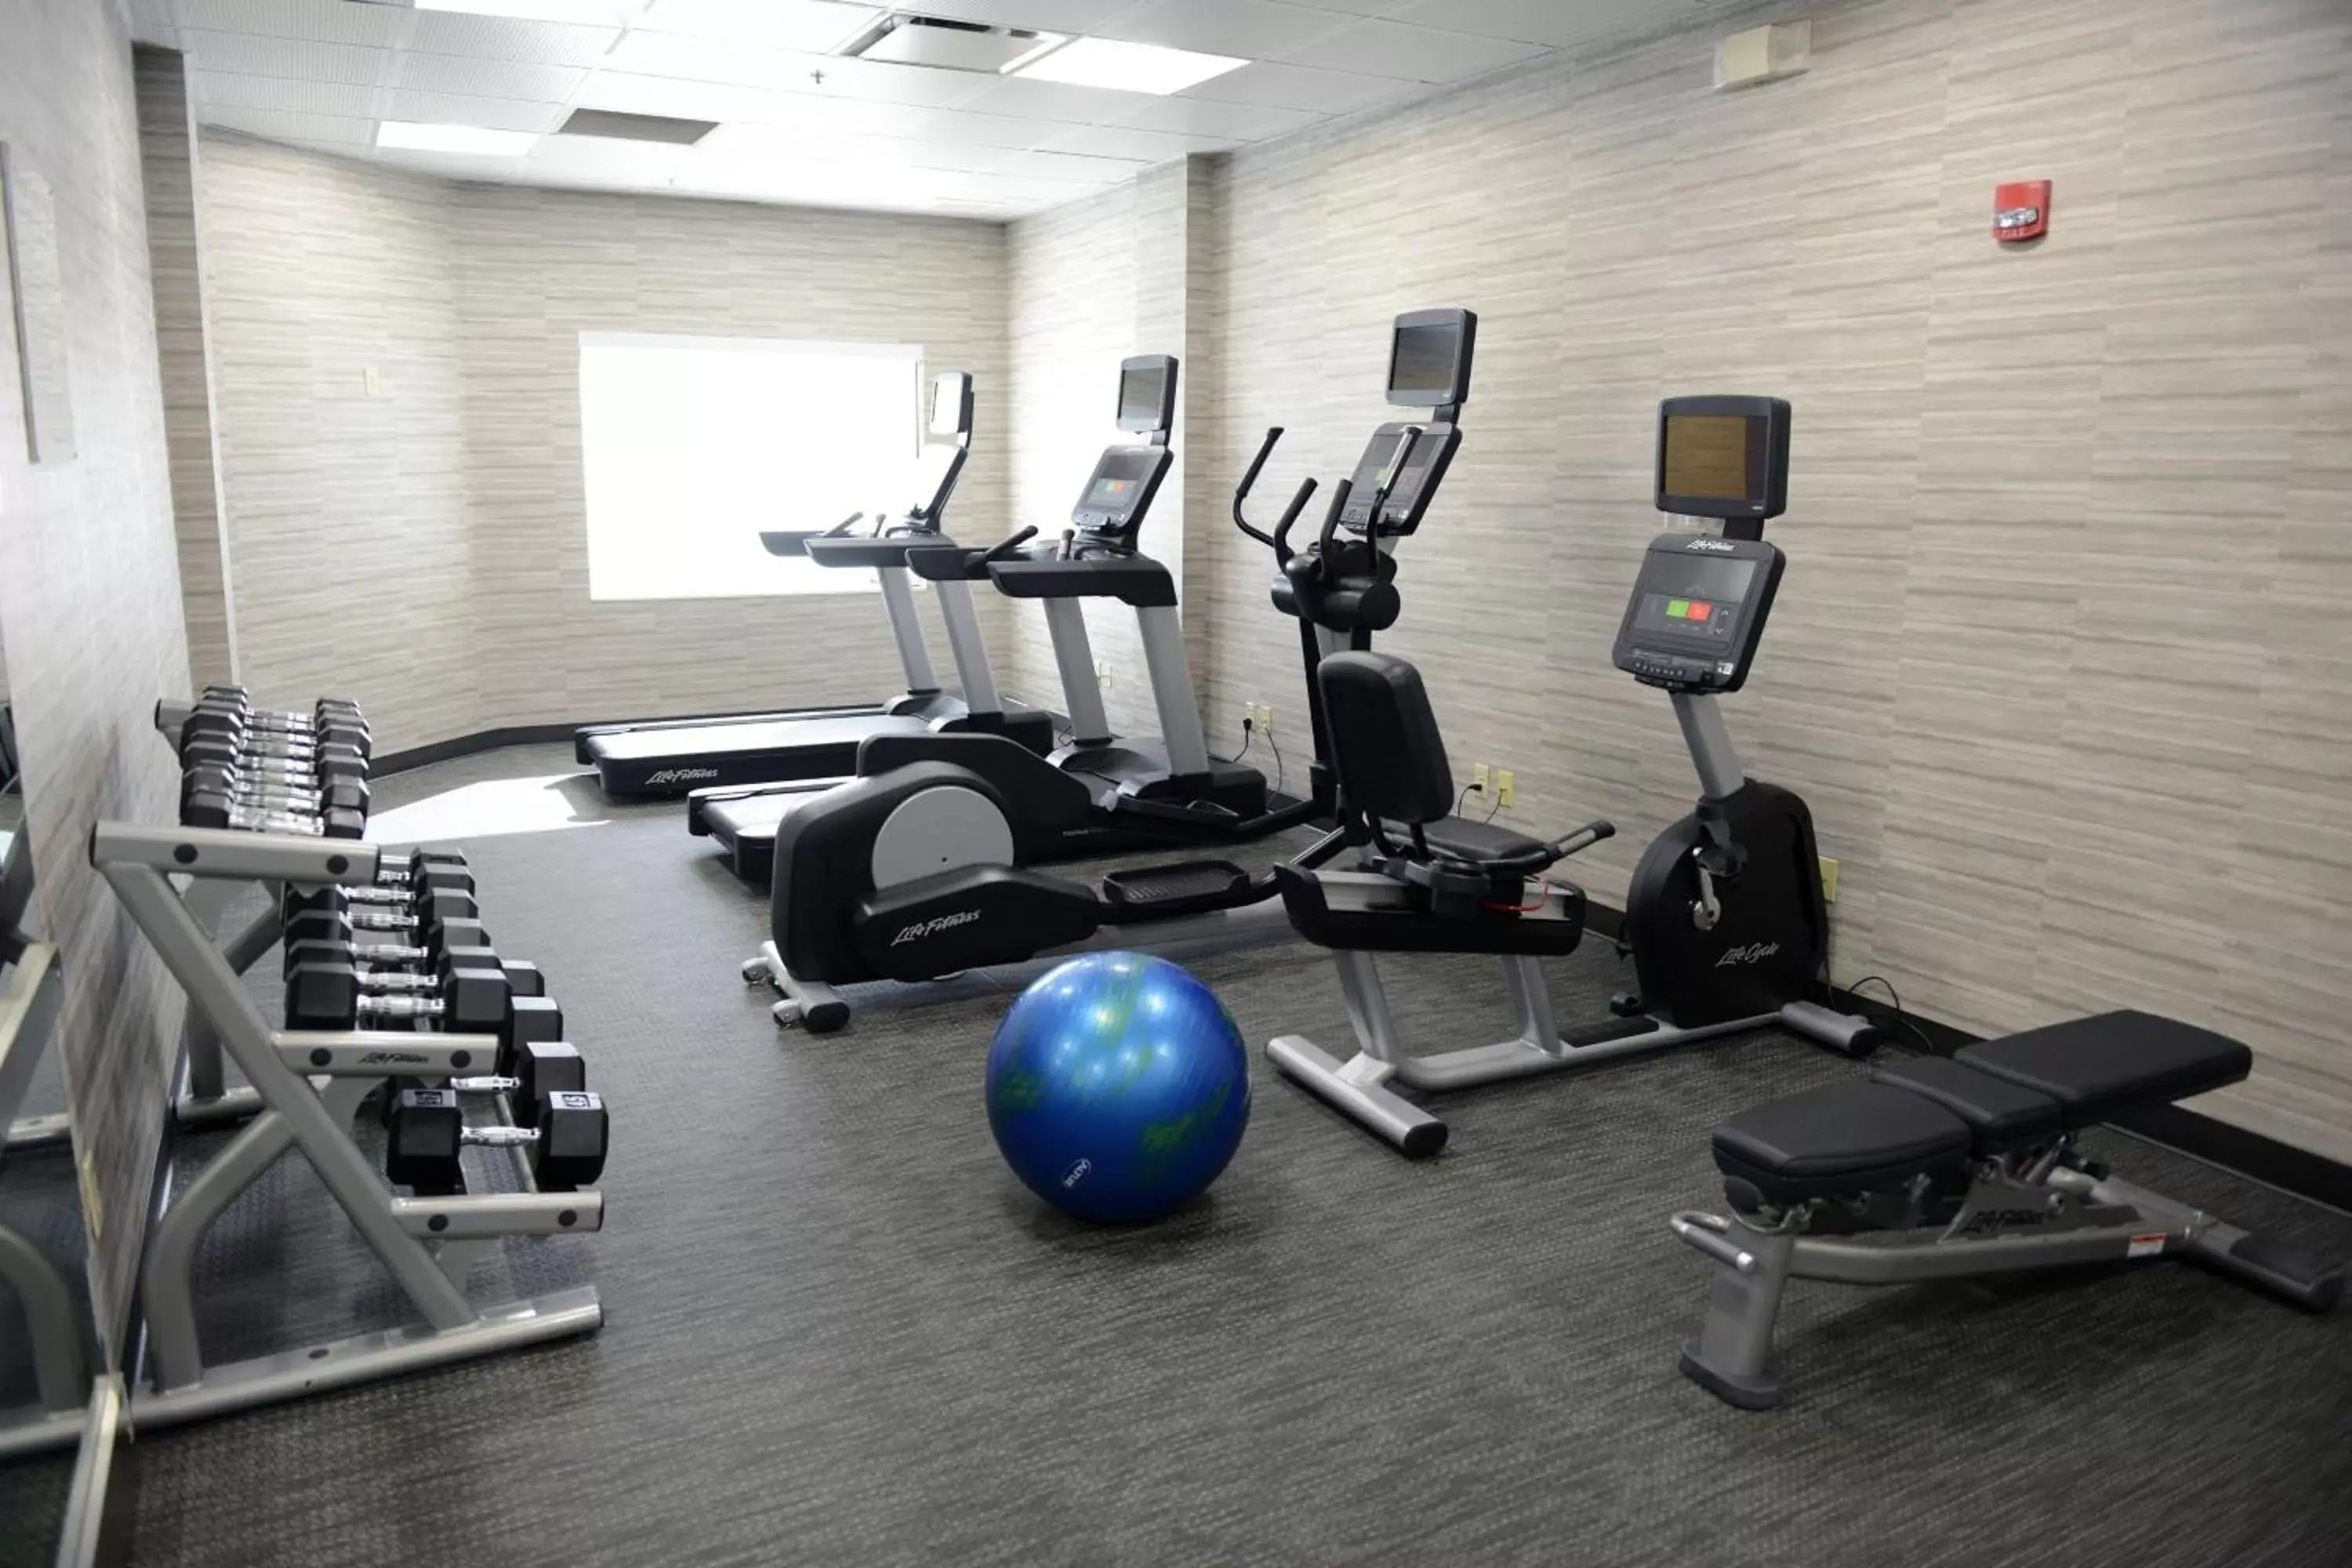 Fitness centre/facilities, Fitness Center/Facilities in Courtyard El Paso Airport